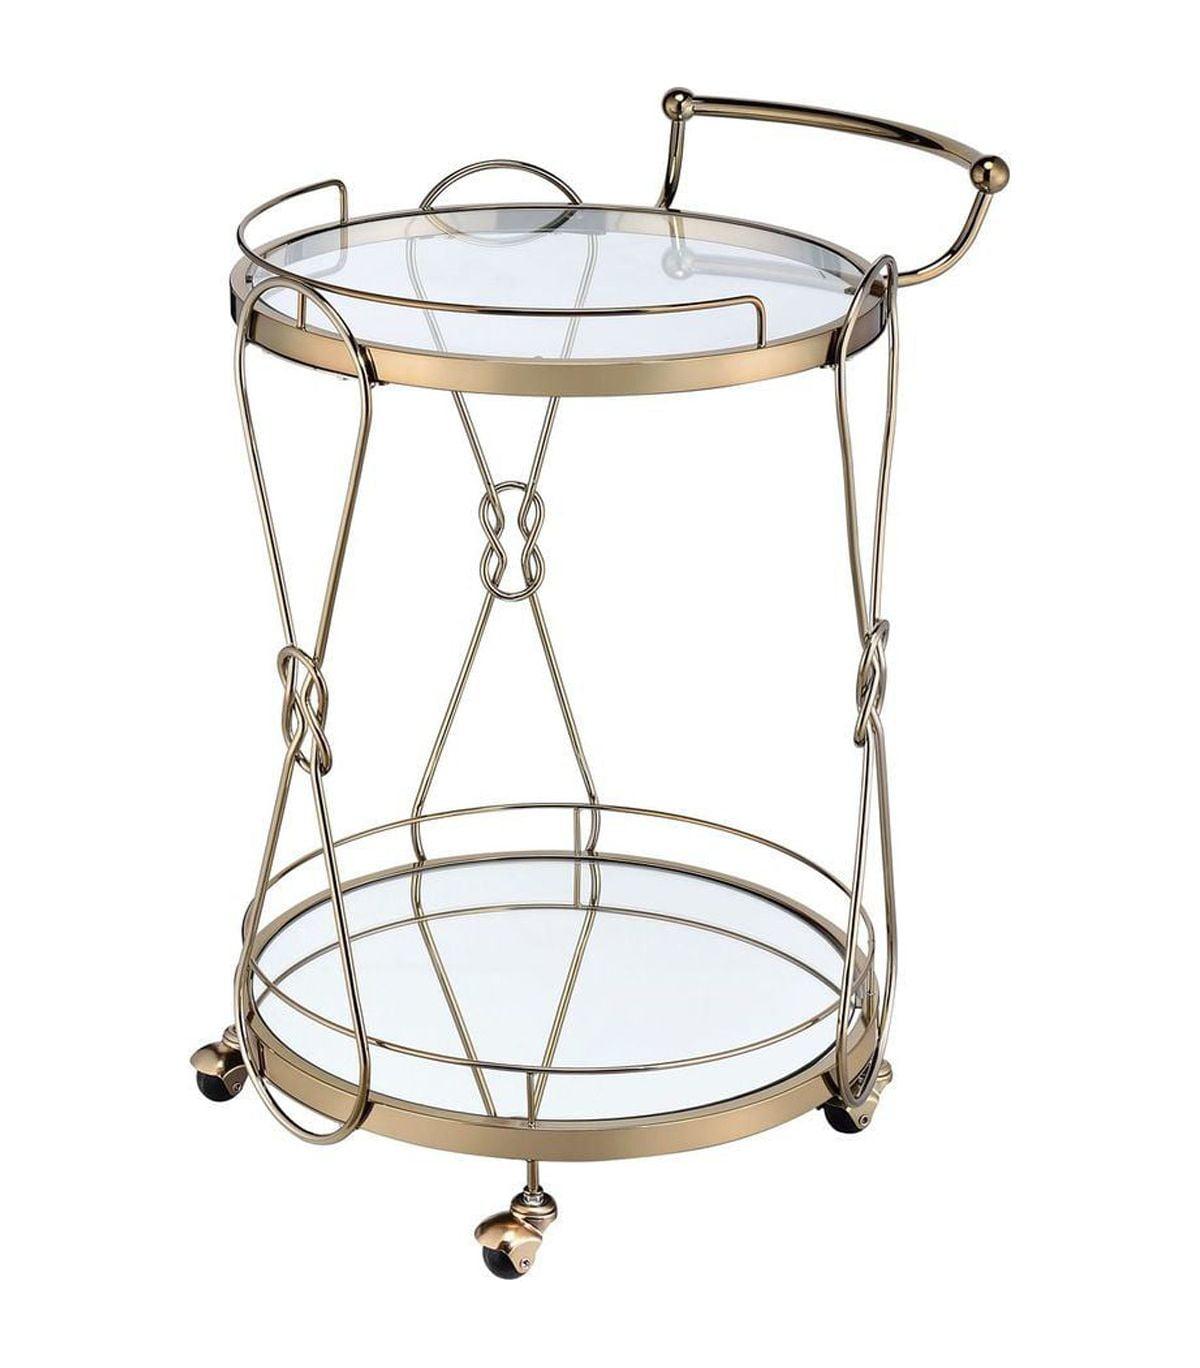 Chic Champagne Round Serving Cart with Glass Shelves and Locking Casters